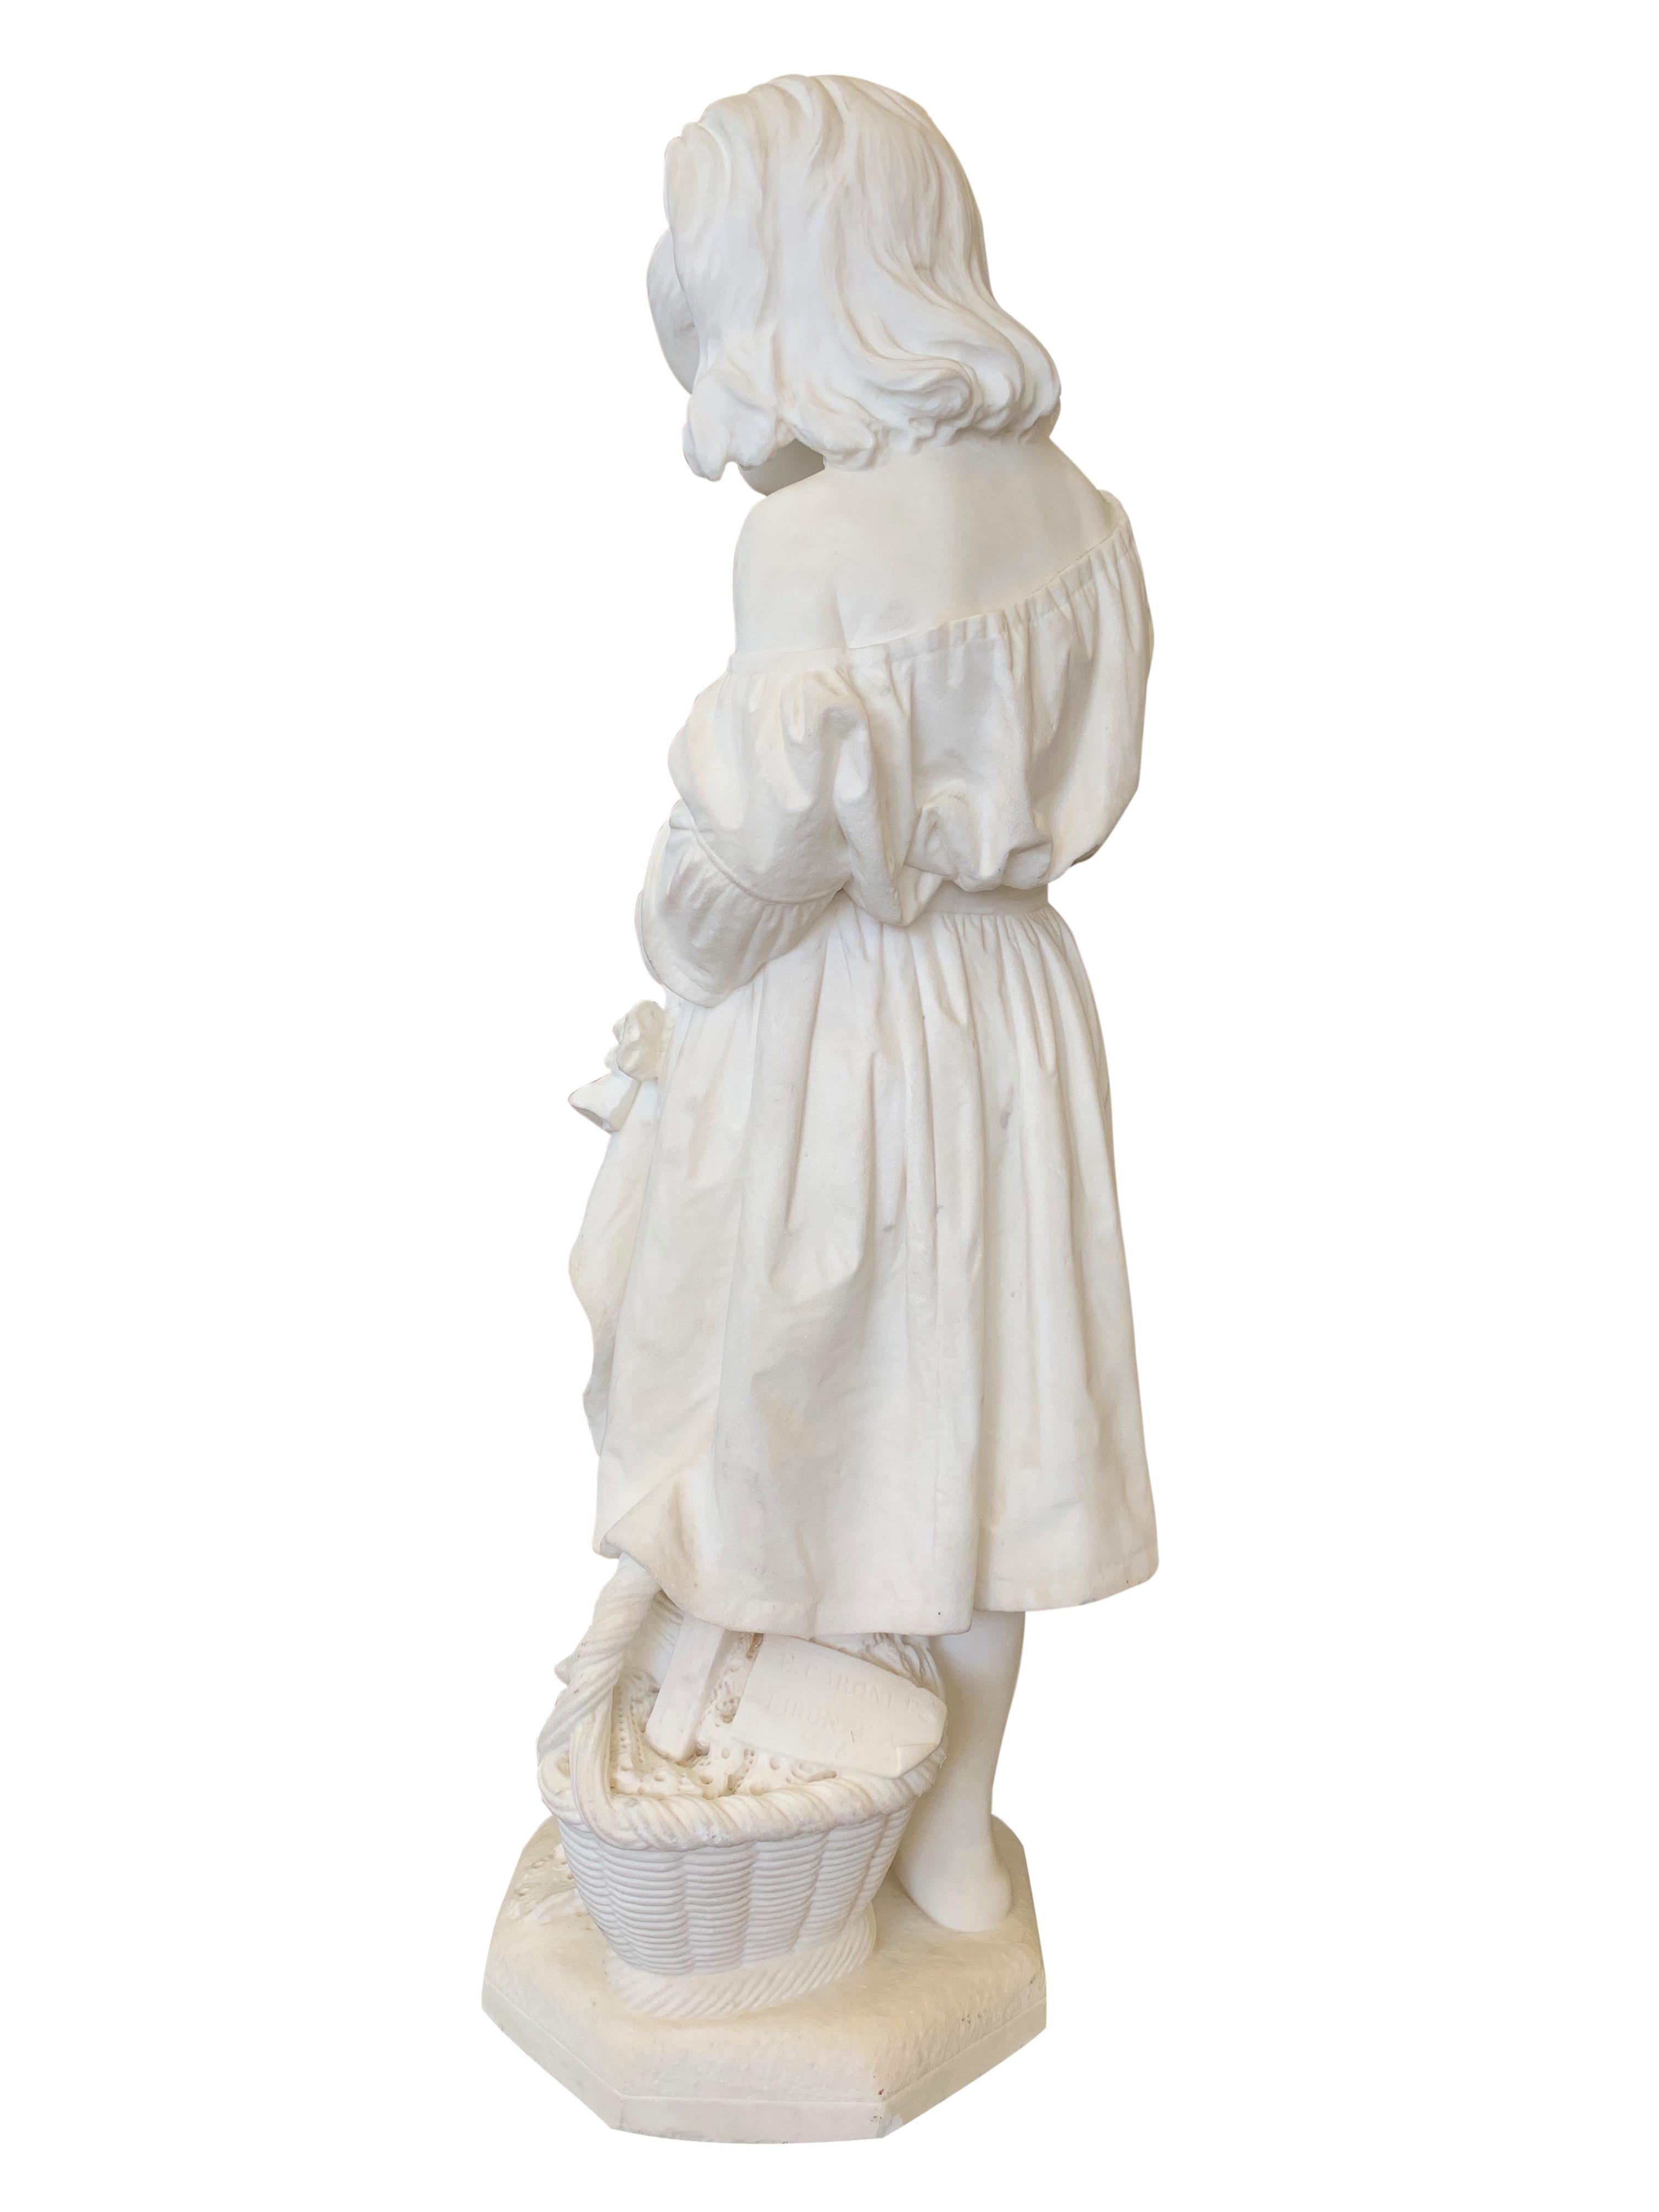 19th Century Italian Carved Marble Figure of a Young Girl by Caroni For Sale 1